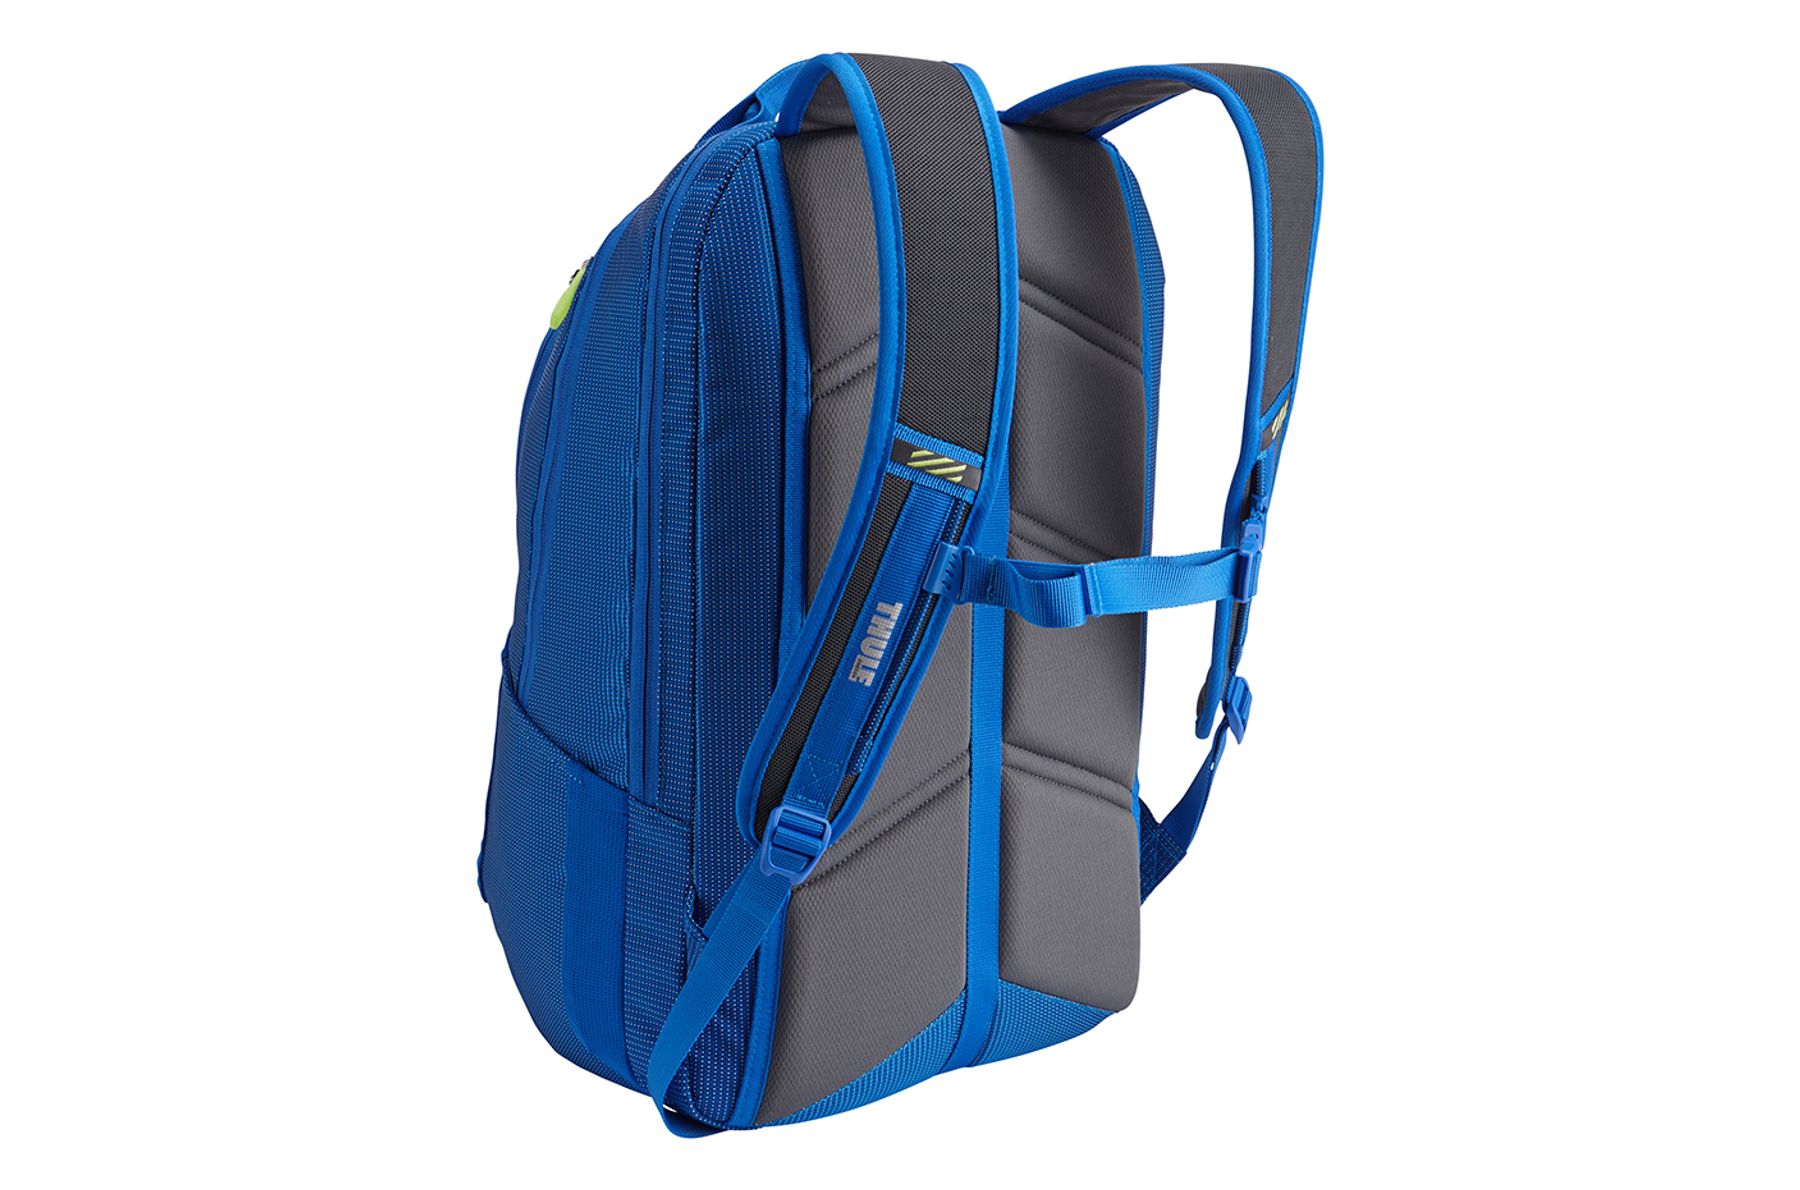 Laptop backpack-Thule Crossover 32L Backpack